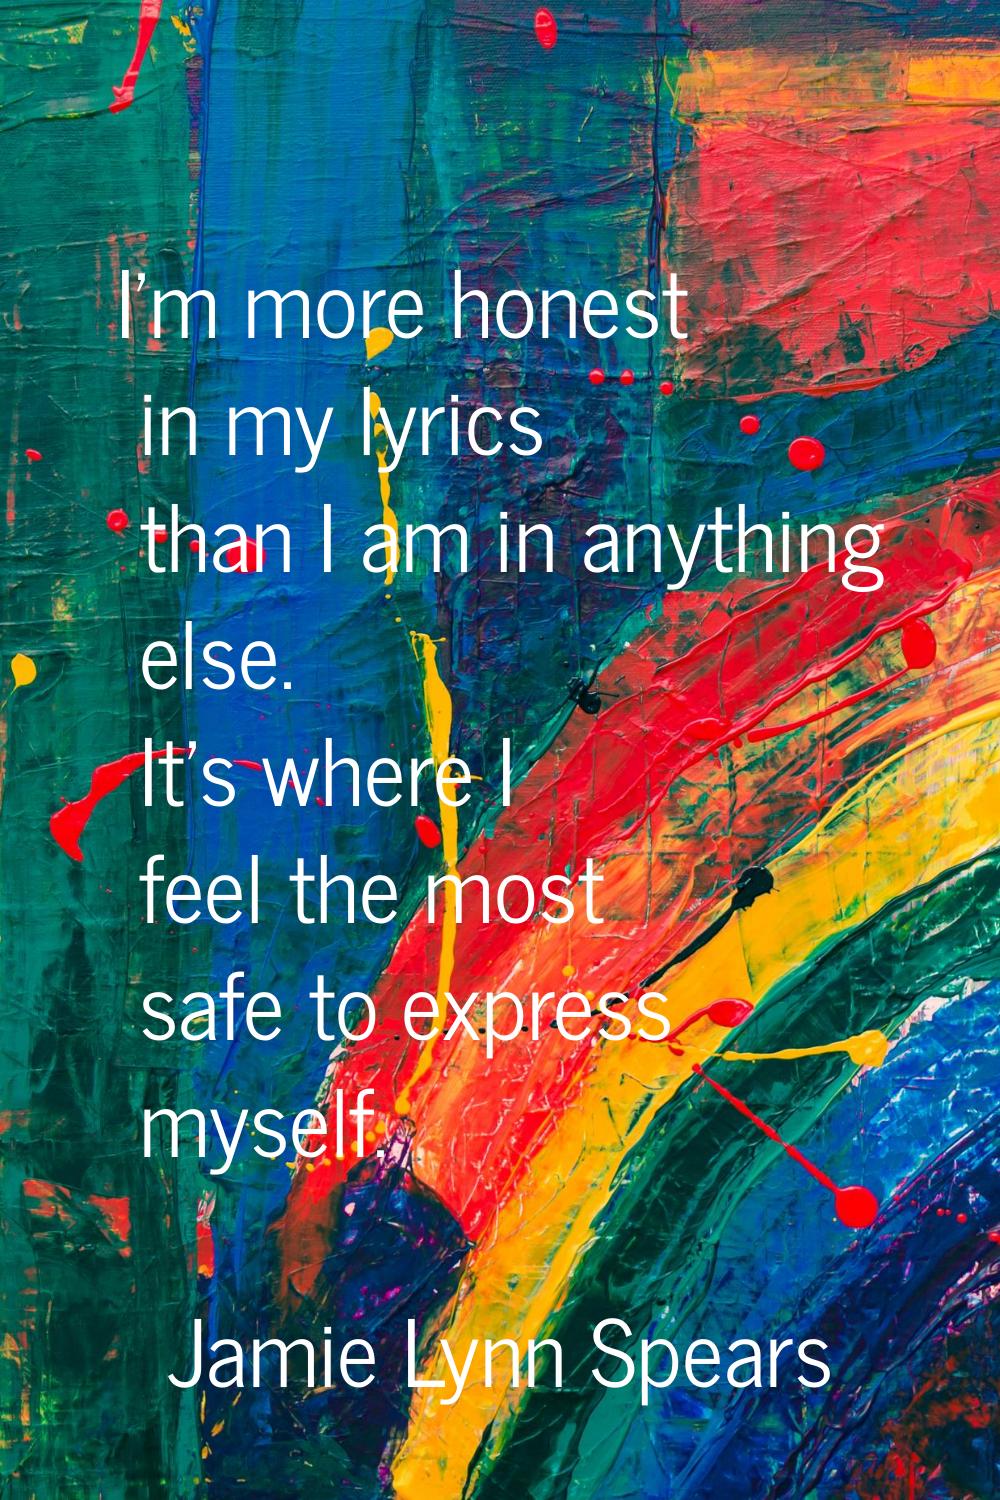 I'm more honest in my lyrics than I am in anything else. It's where I feel the most safe to express